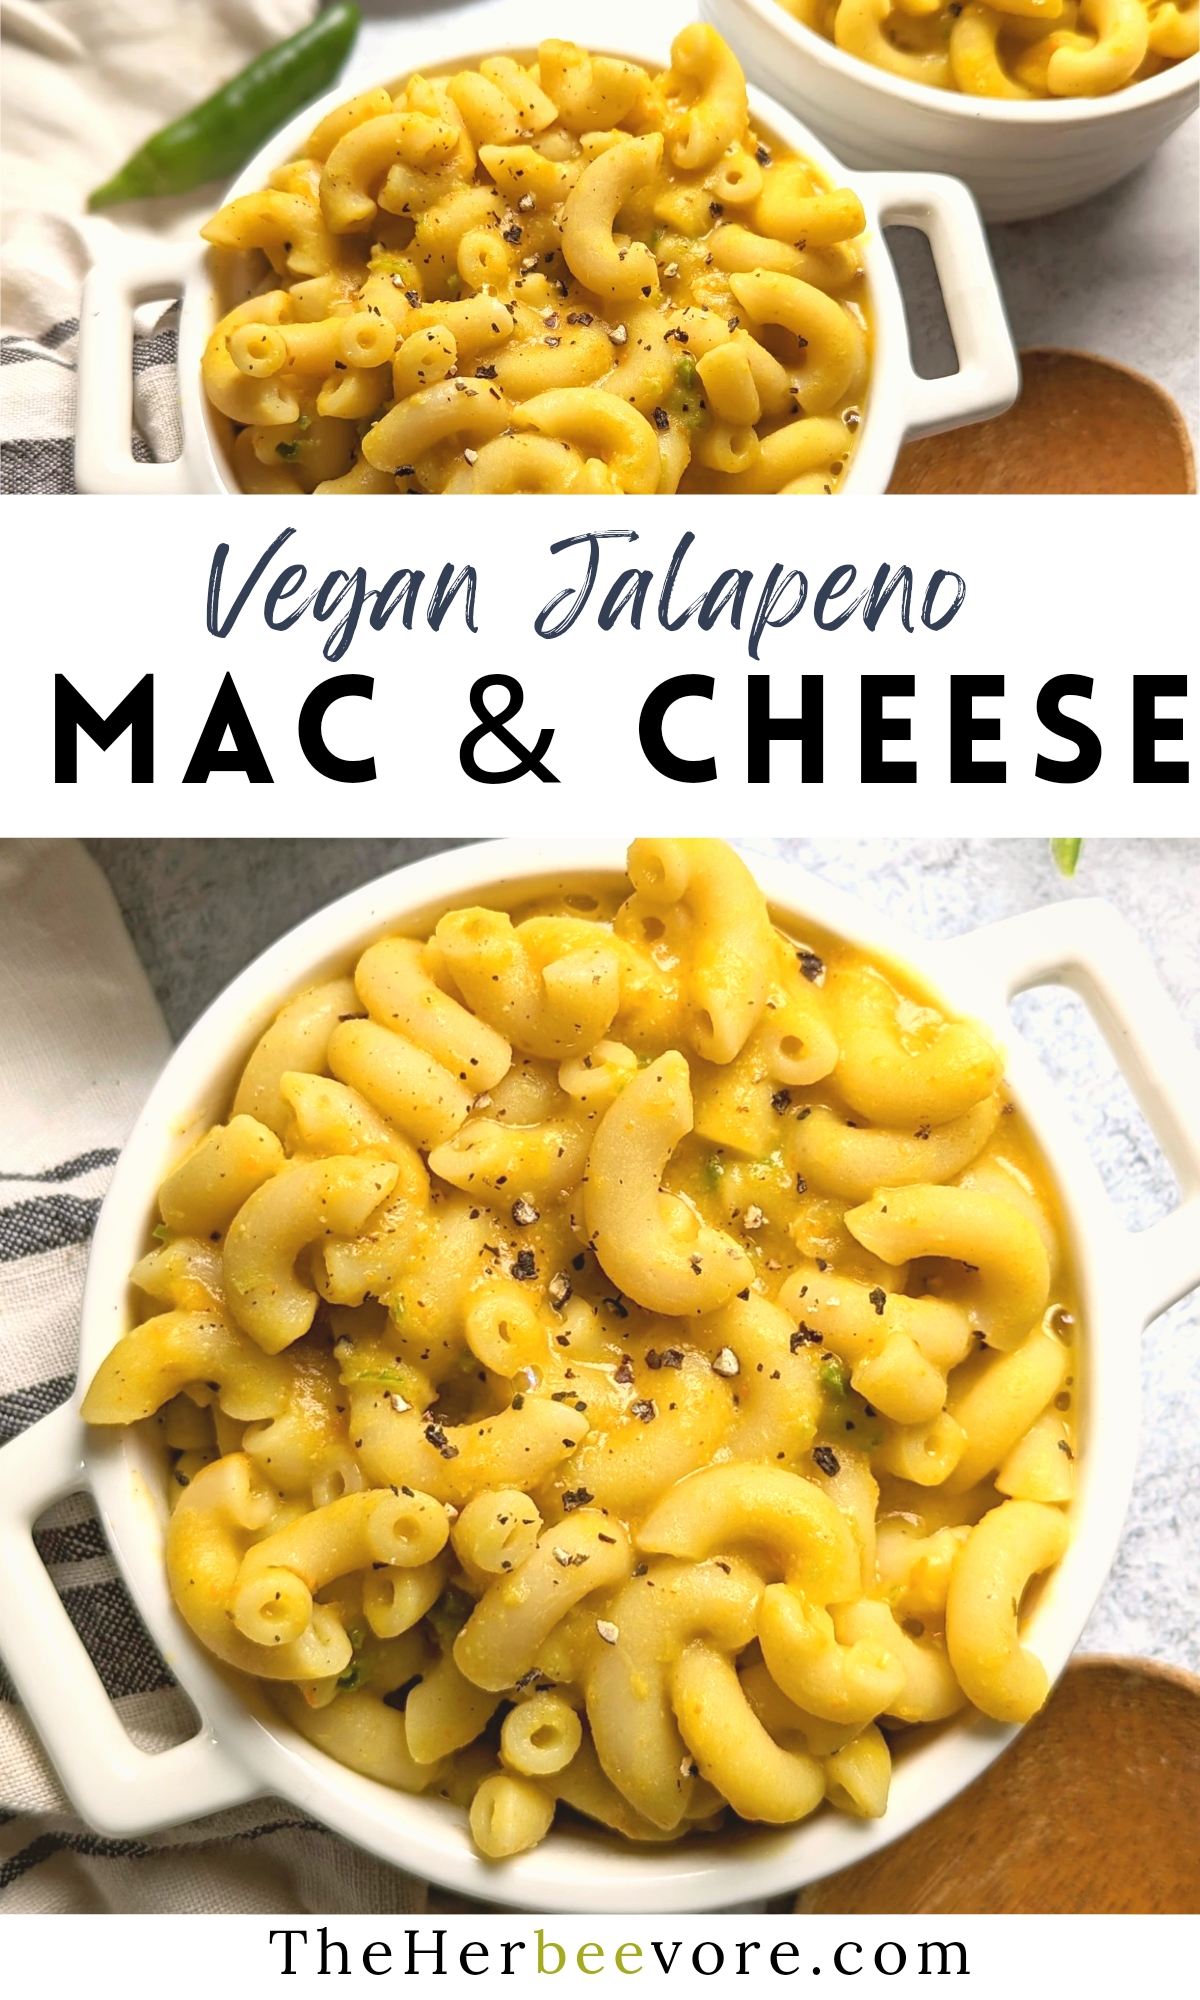 vegan jalapeno mac and cheese recipe with peppers spicy vegan macaroni and cheese recipe